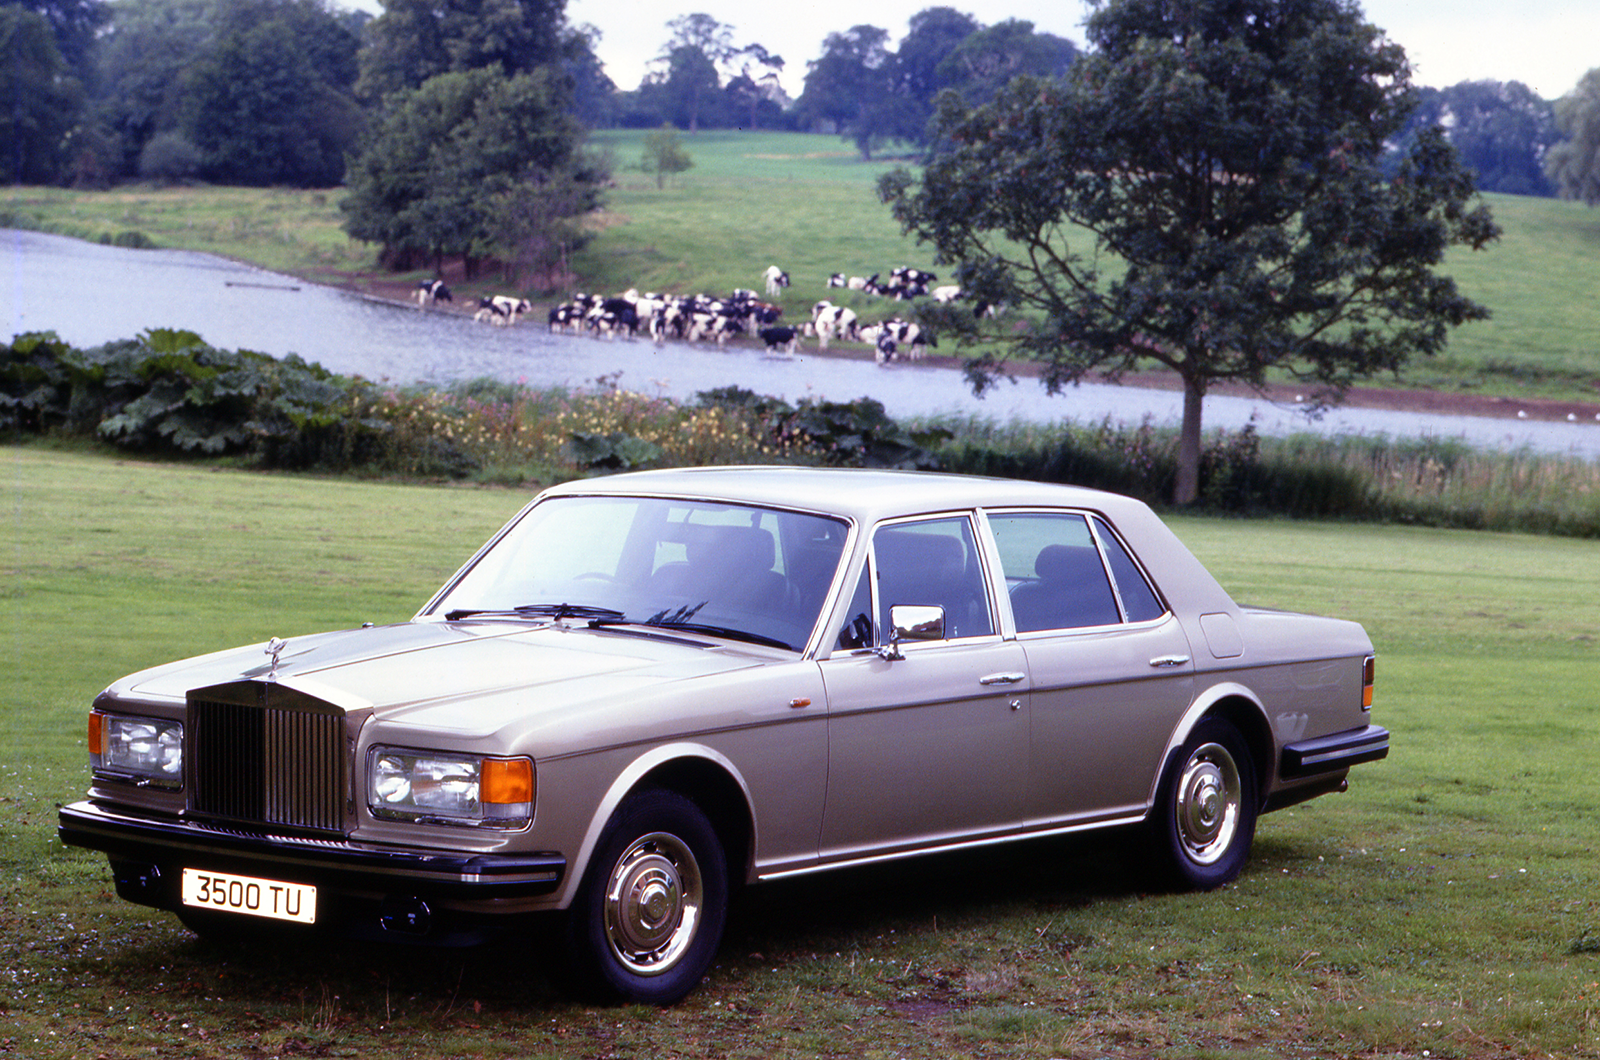 1993 Rolls-Royce Silver Spur II Touring Limousine Archived Test